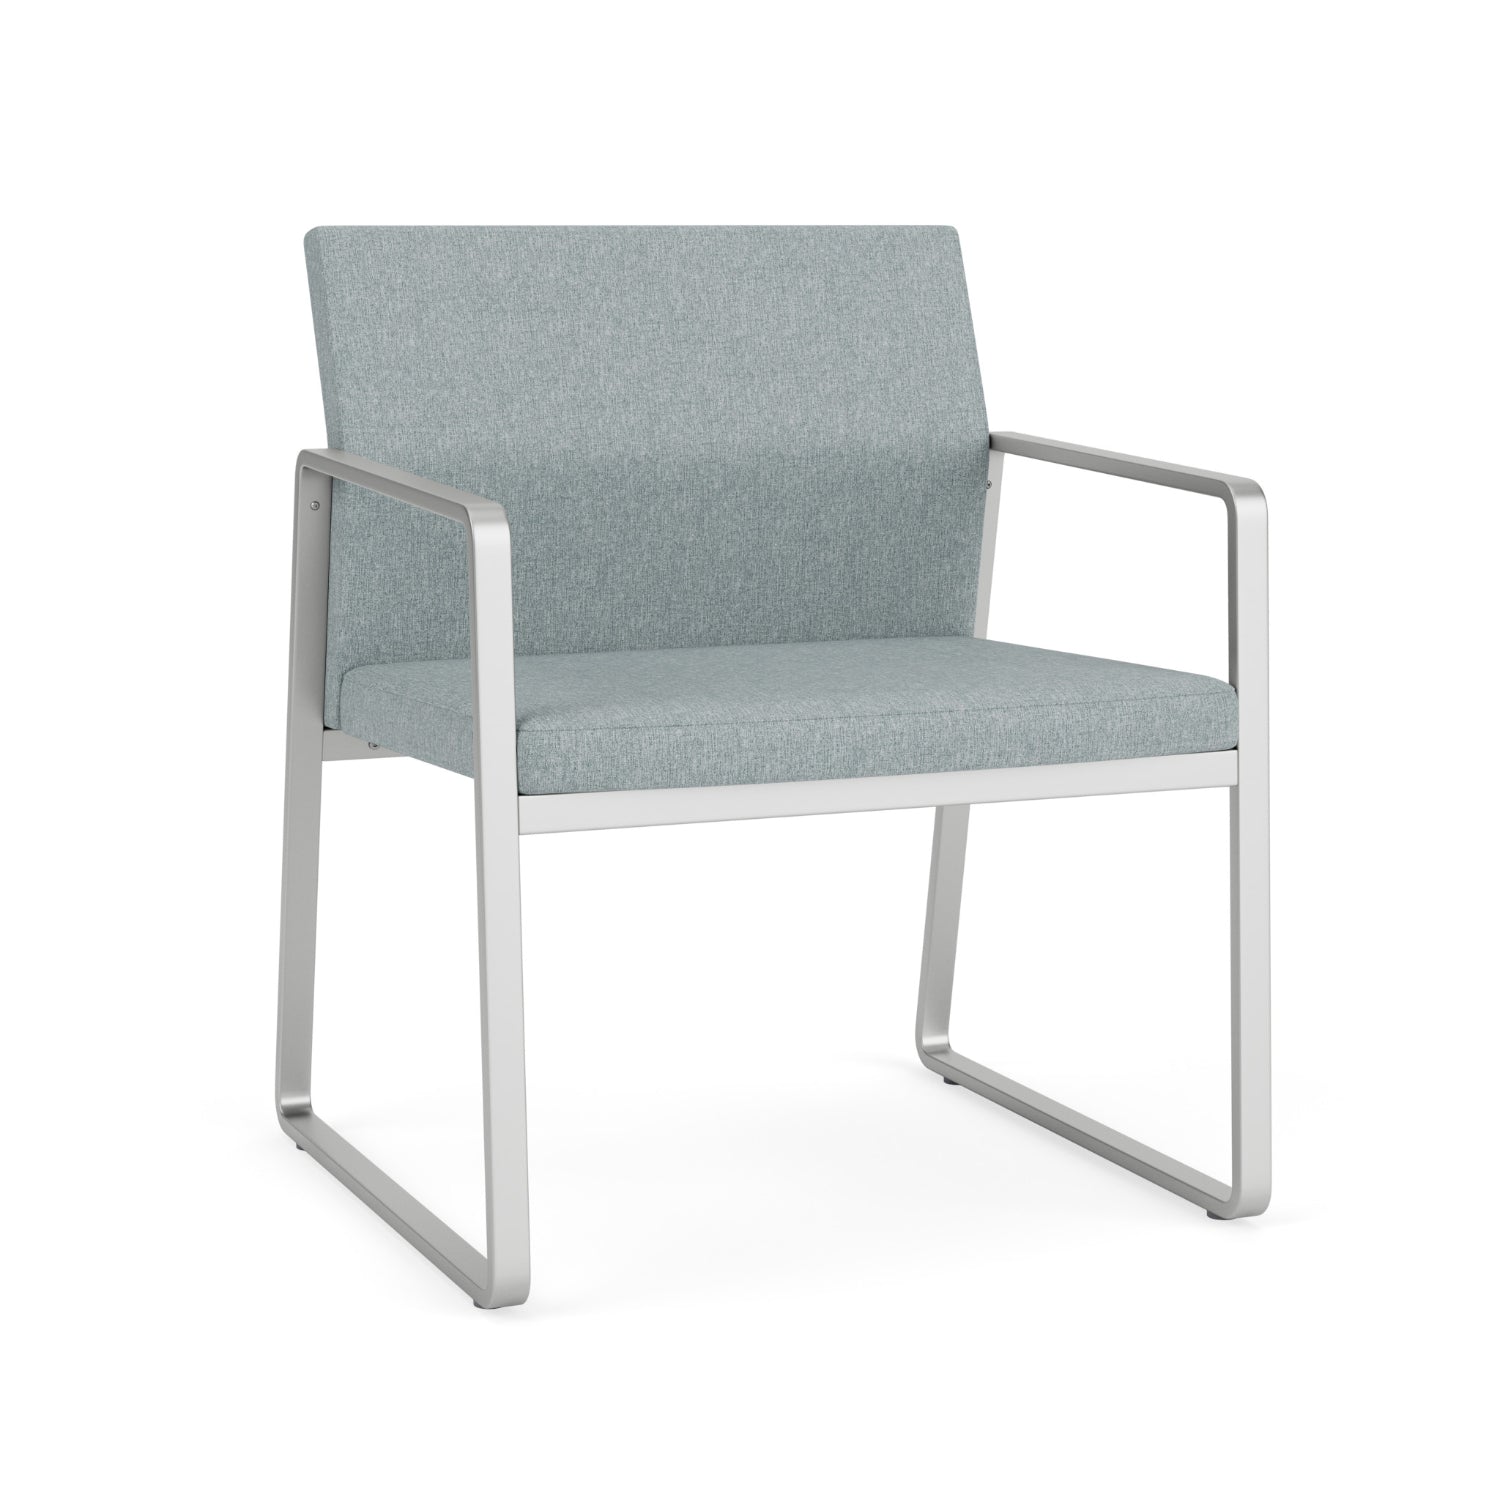 Gansett Collection Reception Seating, Oversize Guest Chair, 400 lb. Capacity, Healthcare Vinyl Upholstery, FREE SHIPPING